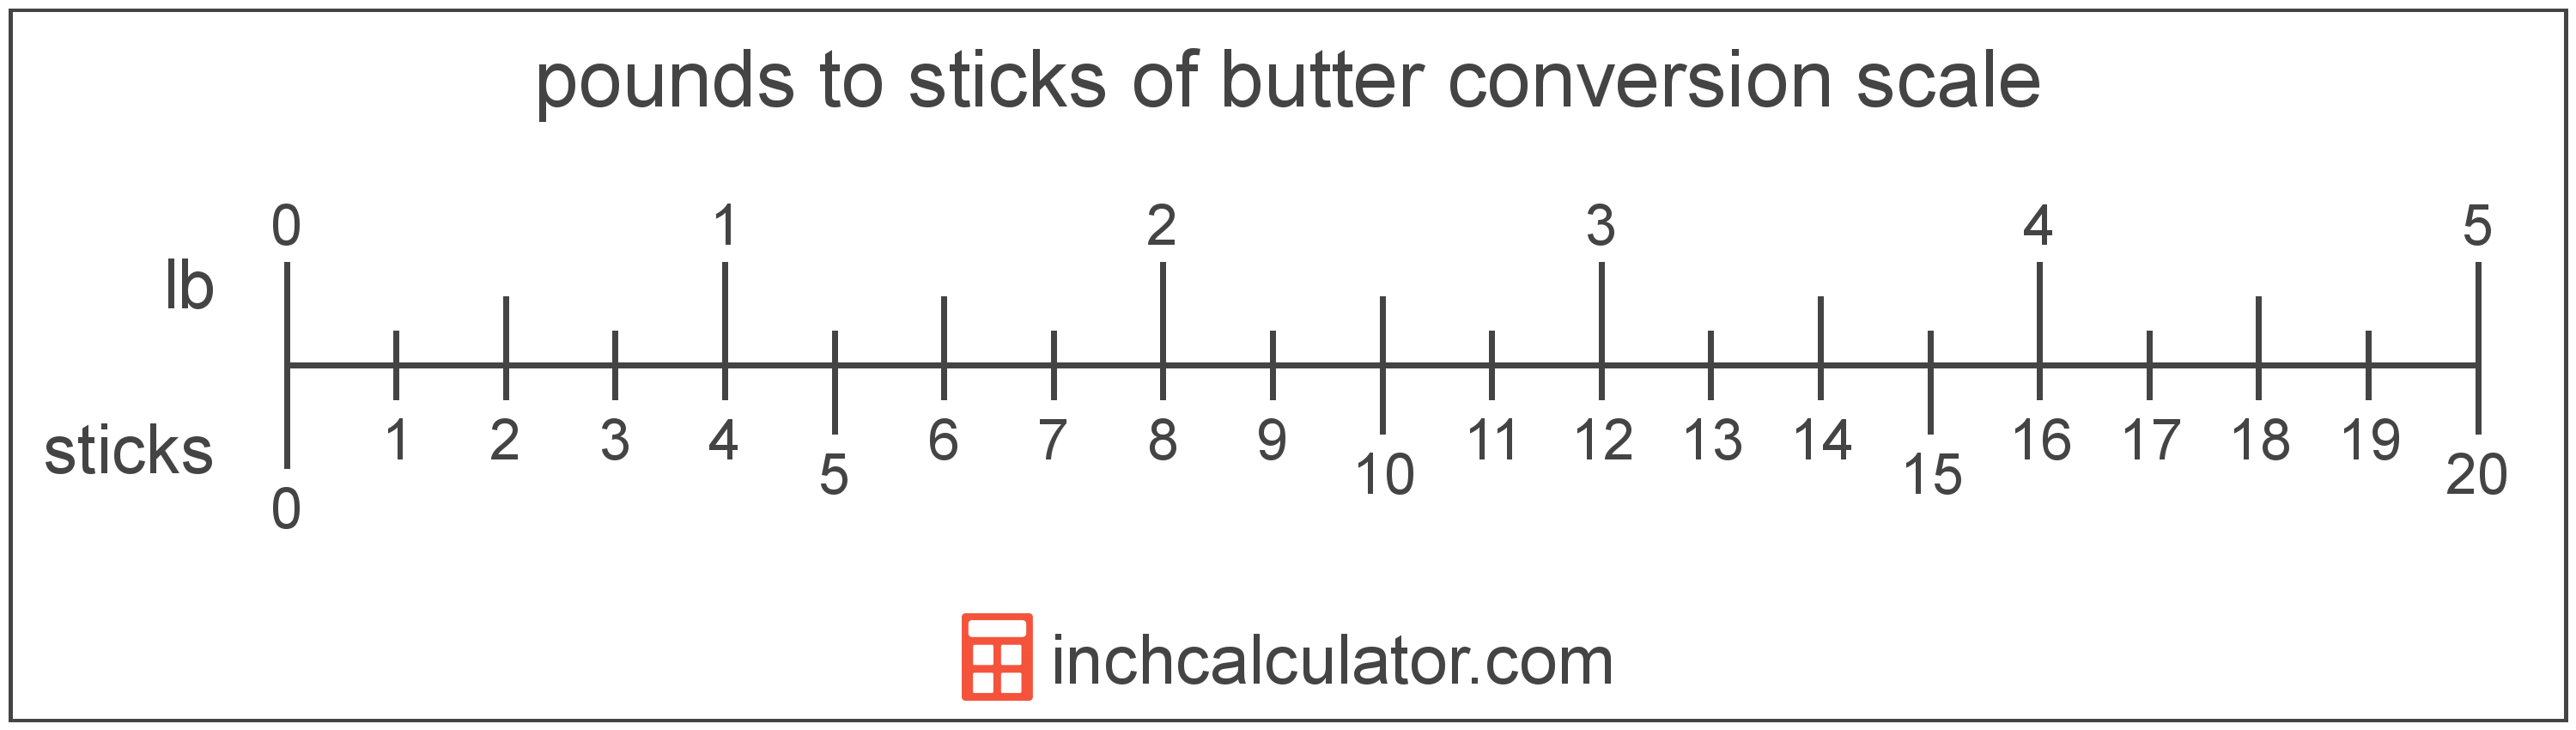 conversion scale showing pounds and equivalent sticks of butter butter values